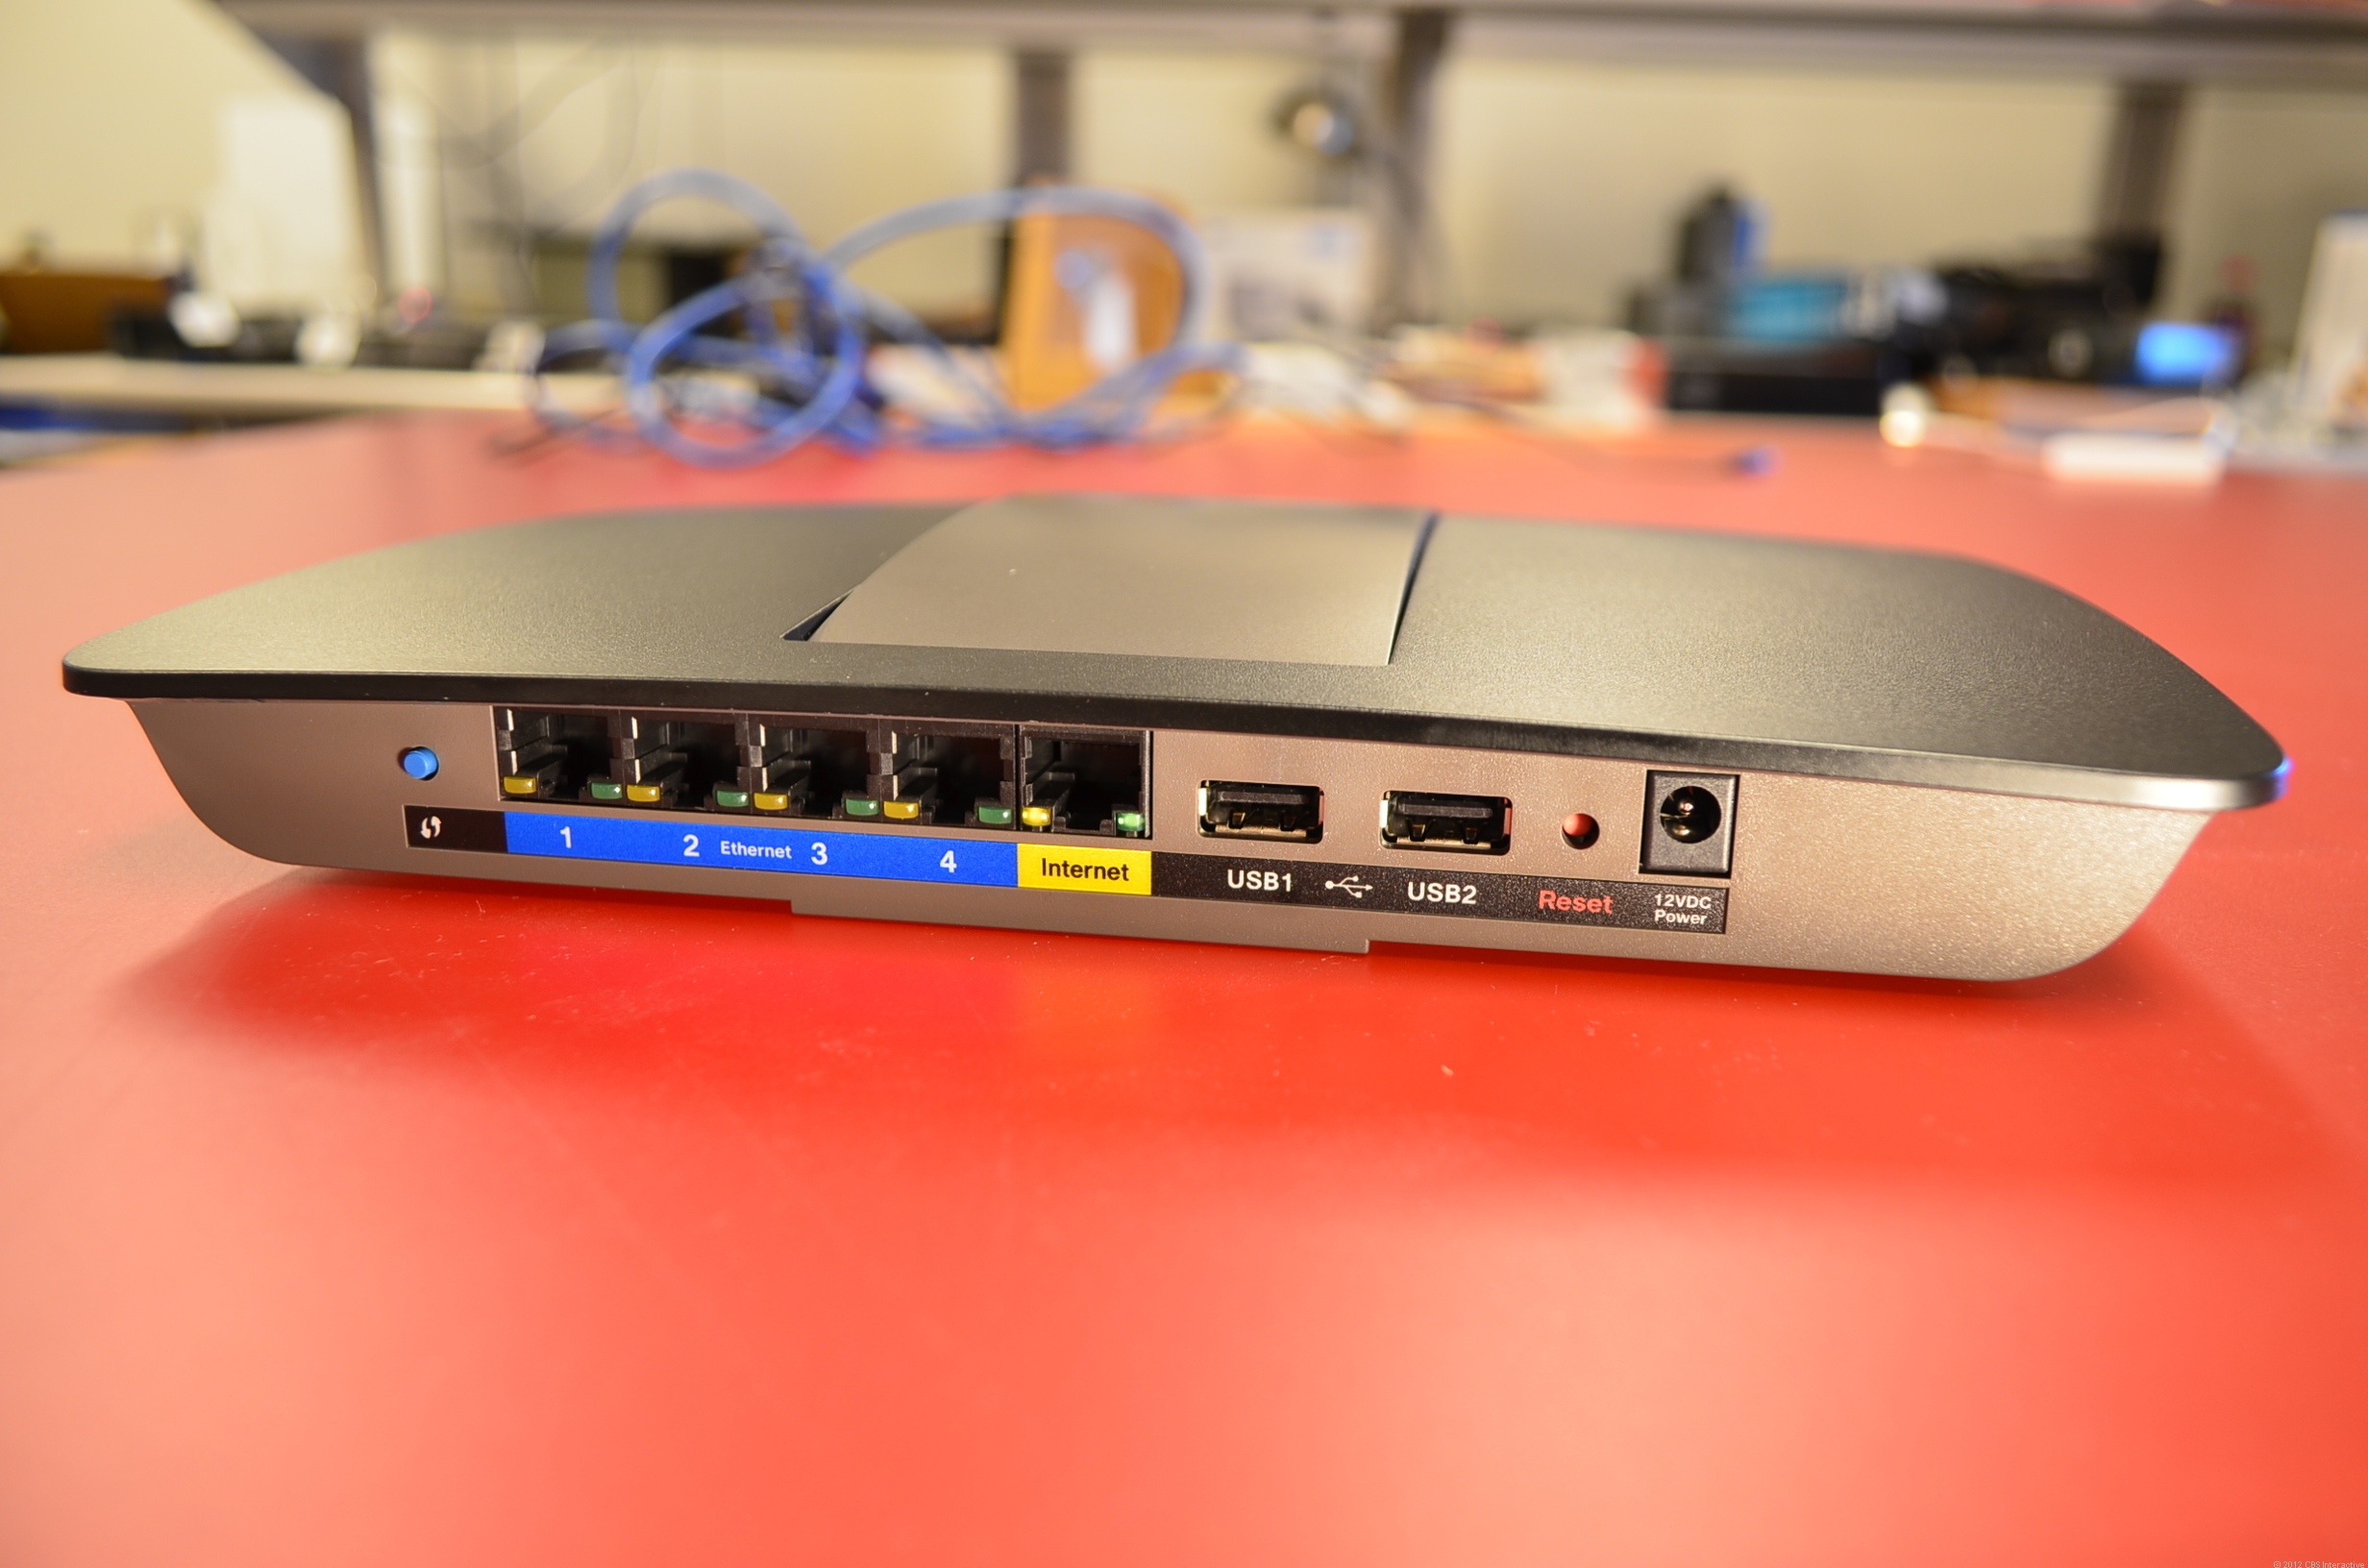 A router's WAN (Internet) port is always clearly distinguished from the LAN (Ethernet) ports. Also note the reset button, which brings the router's settings to default value.